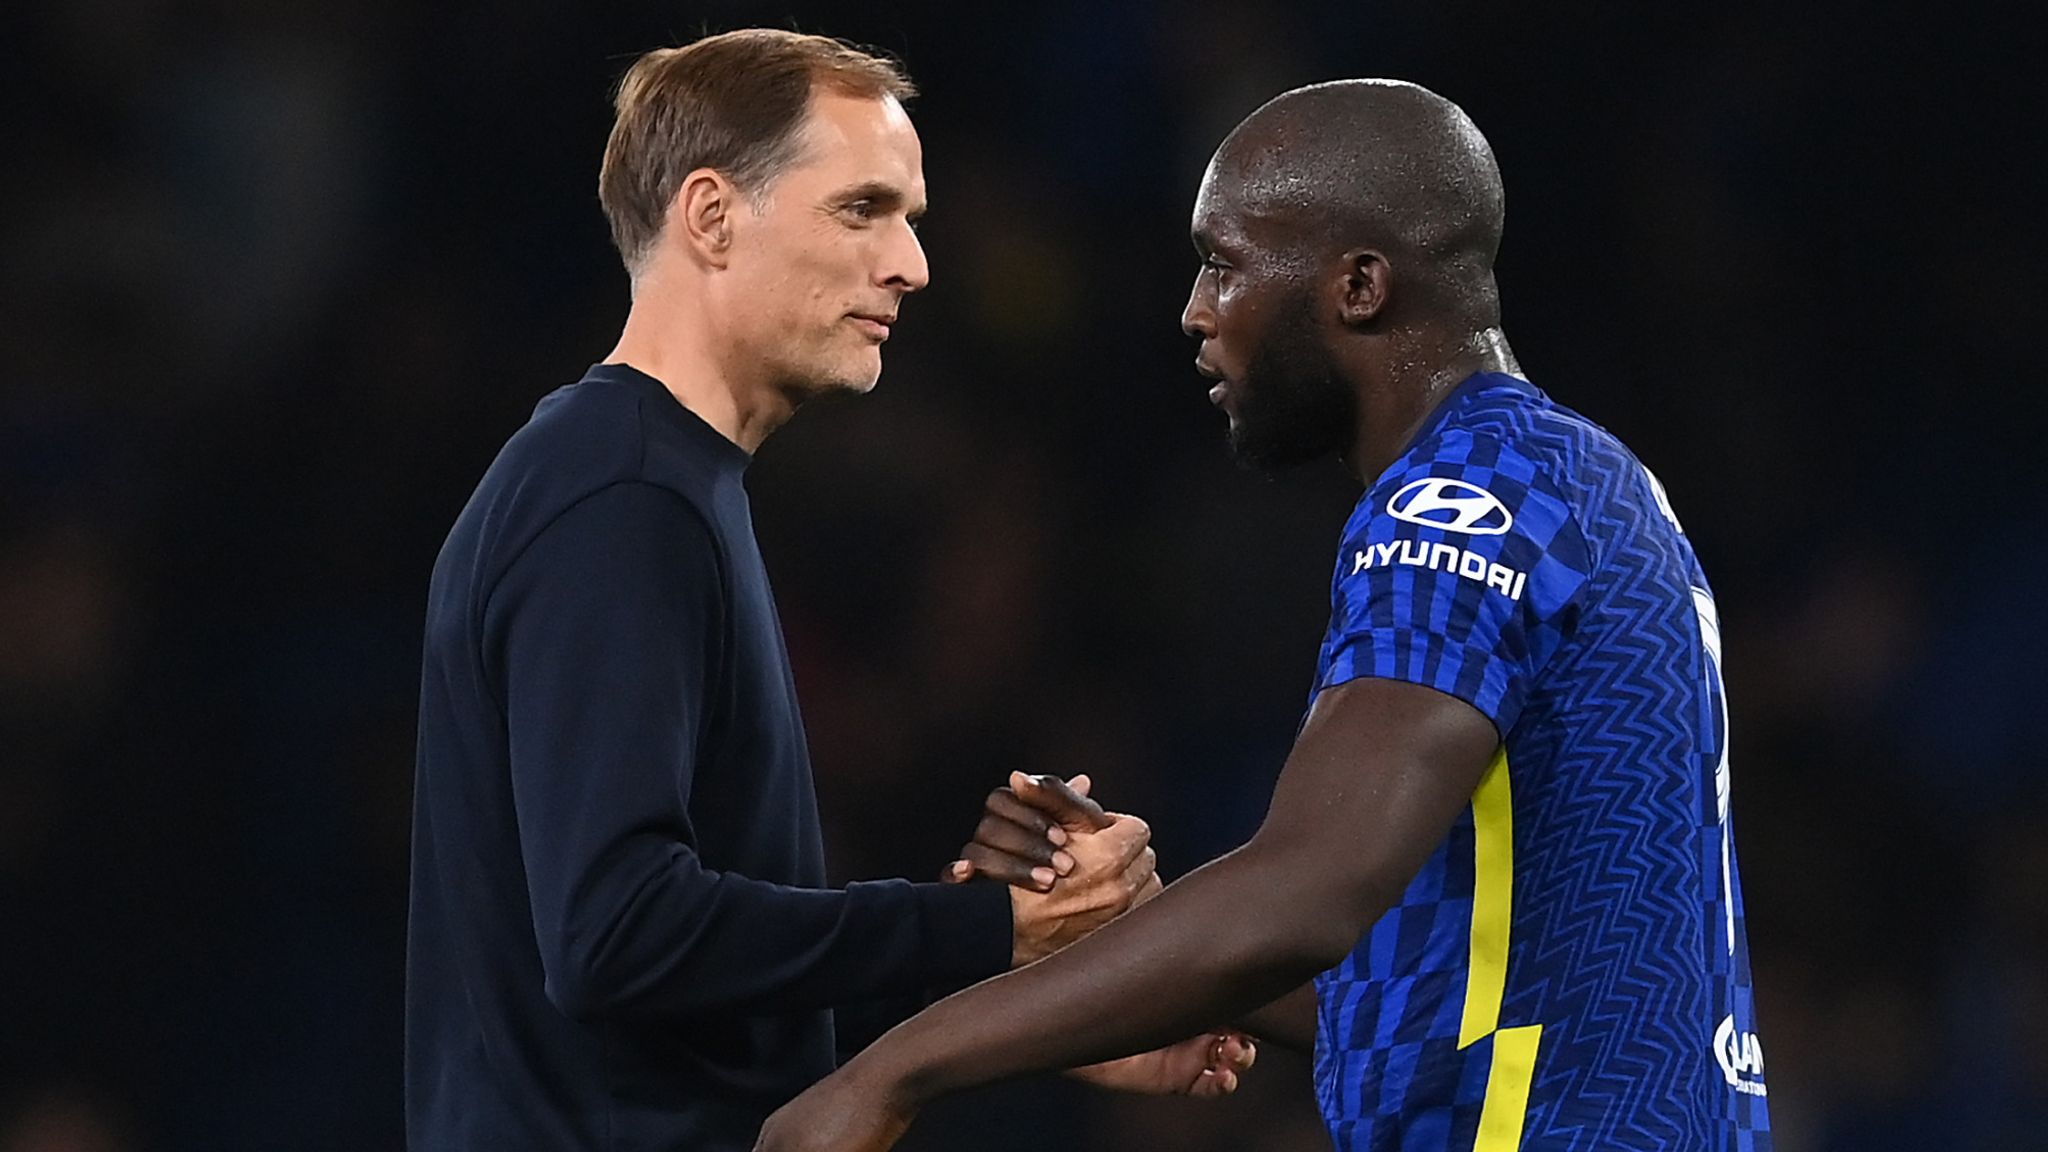 Thomas Tuchel told what he must change for Chelsea to win the Premier League